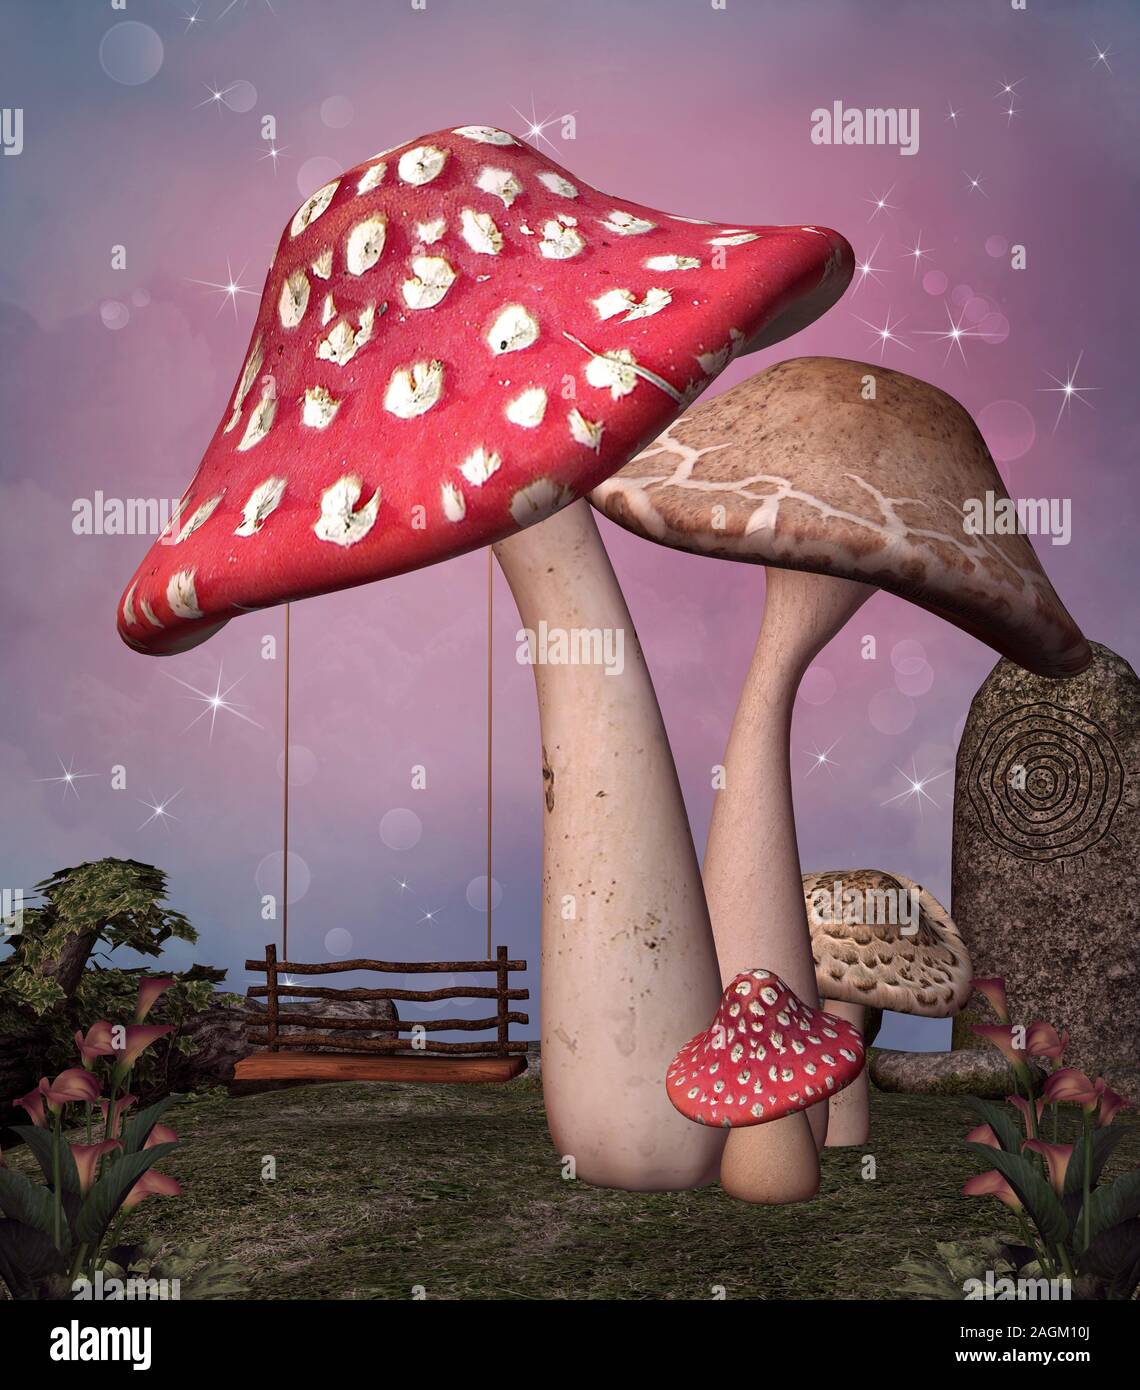 Enchanted night scenery in the woodland with colorful mushrooms and a swing Stock Photo